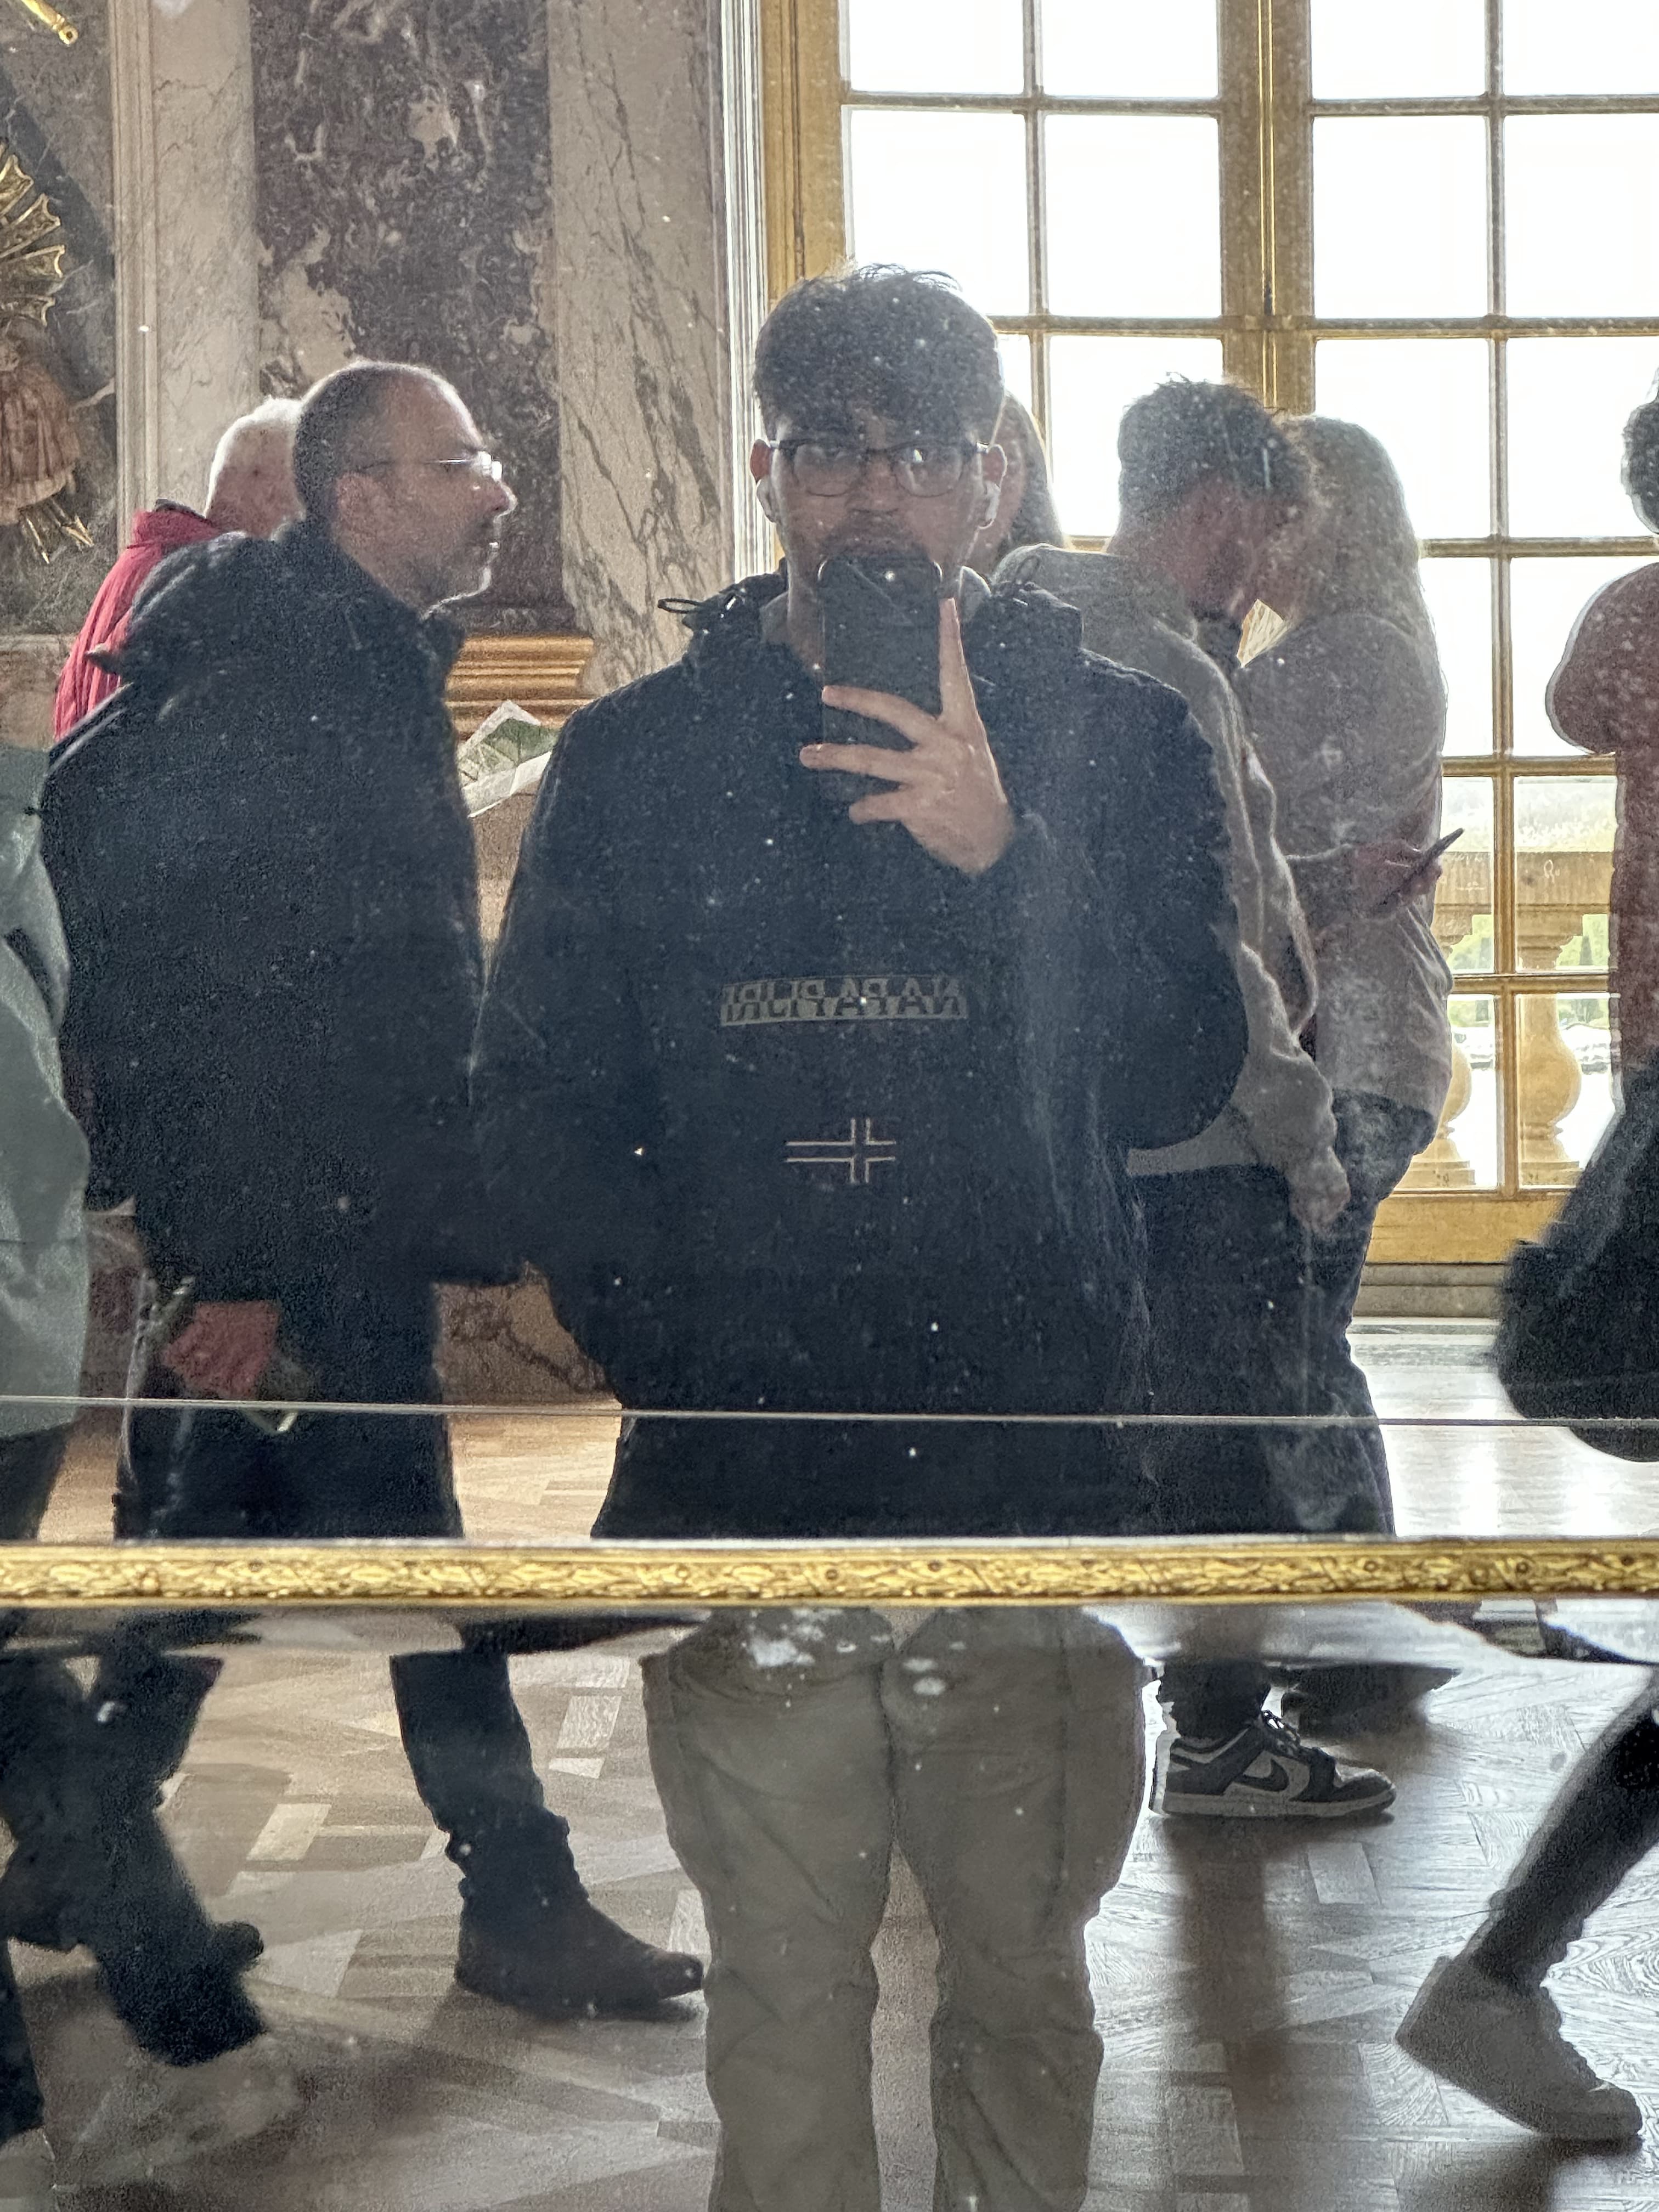 Mirror Selfie in the Hall of Mirrors at the Palace of Versailles